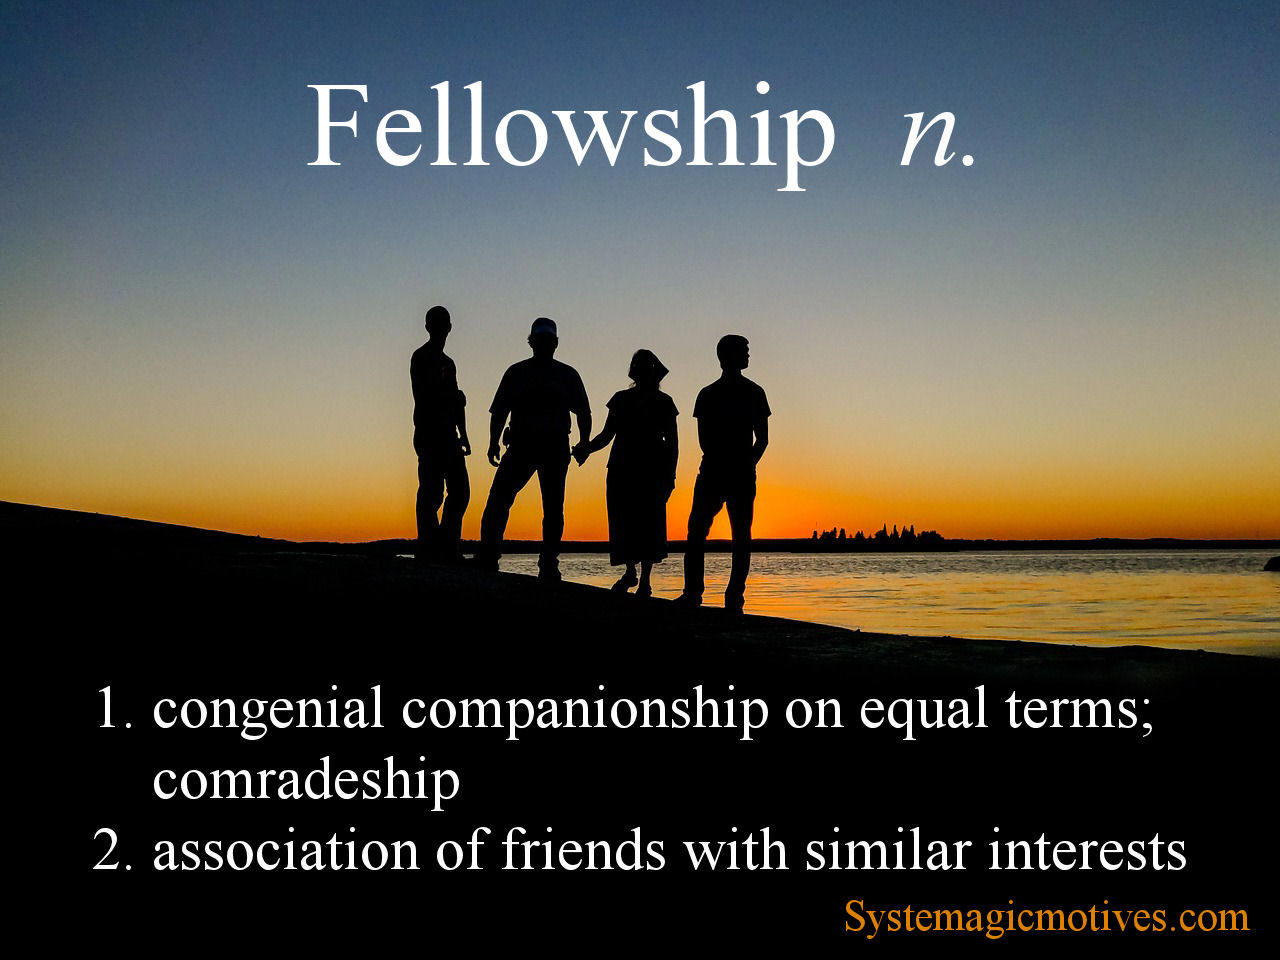 Graphic Definition of Fellowship